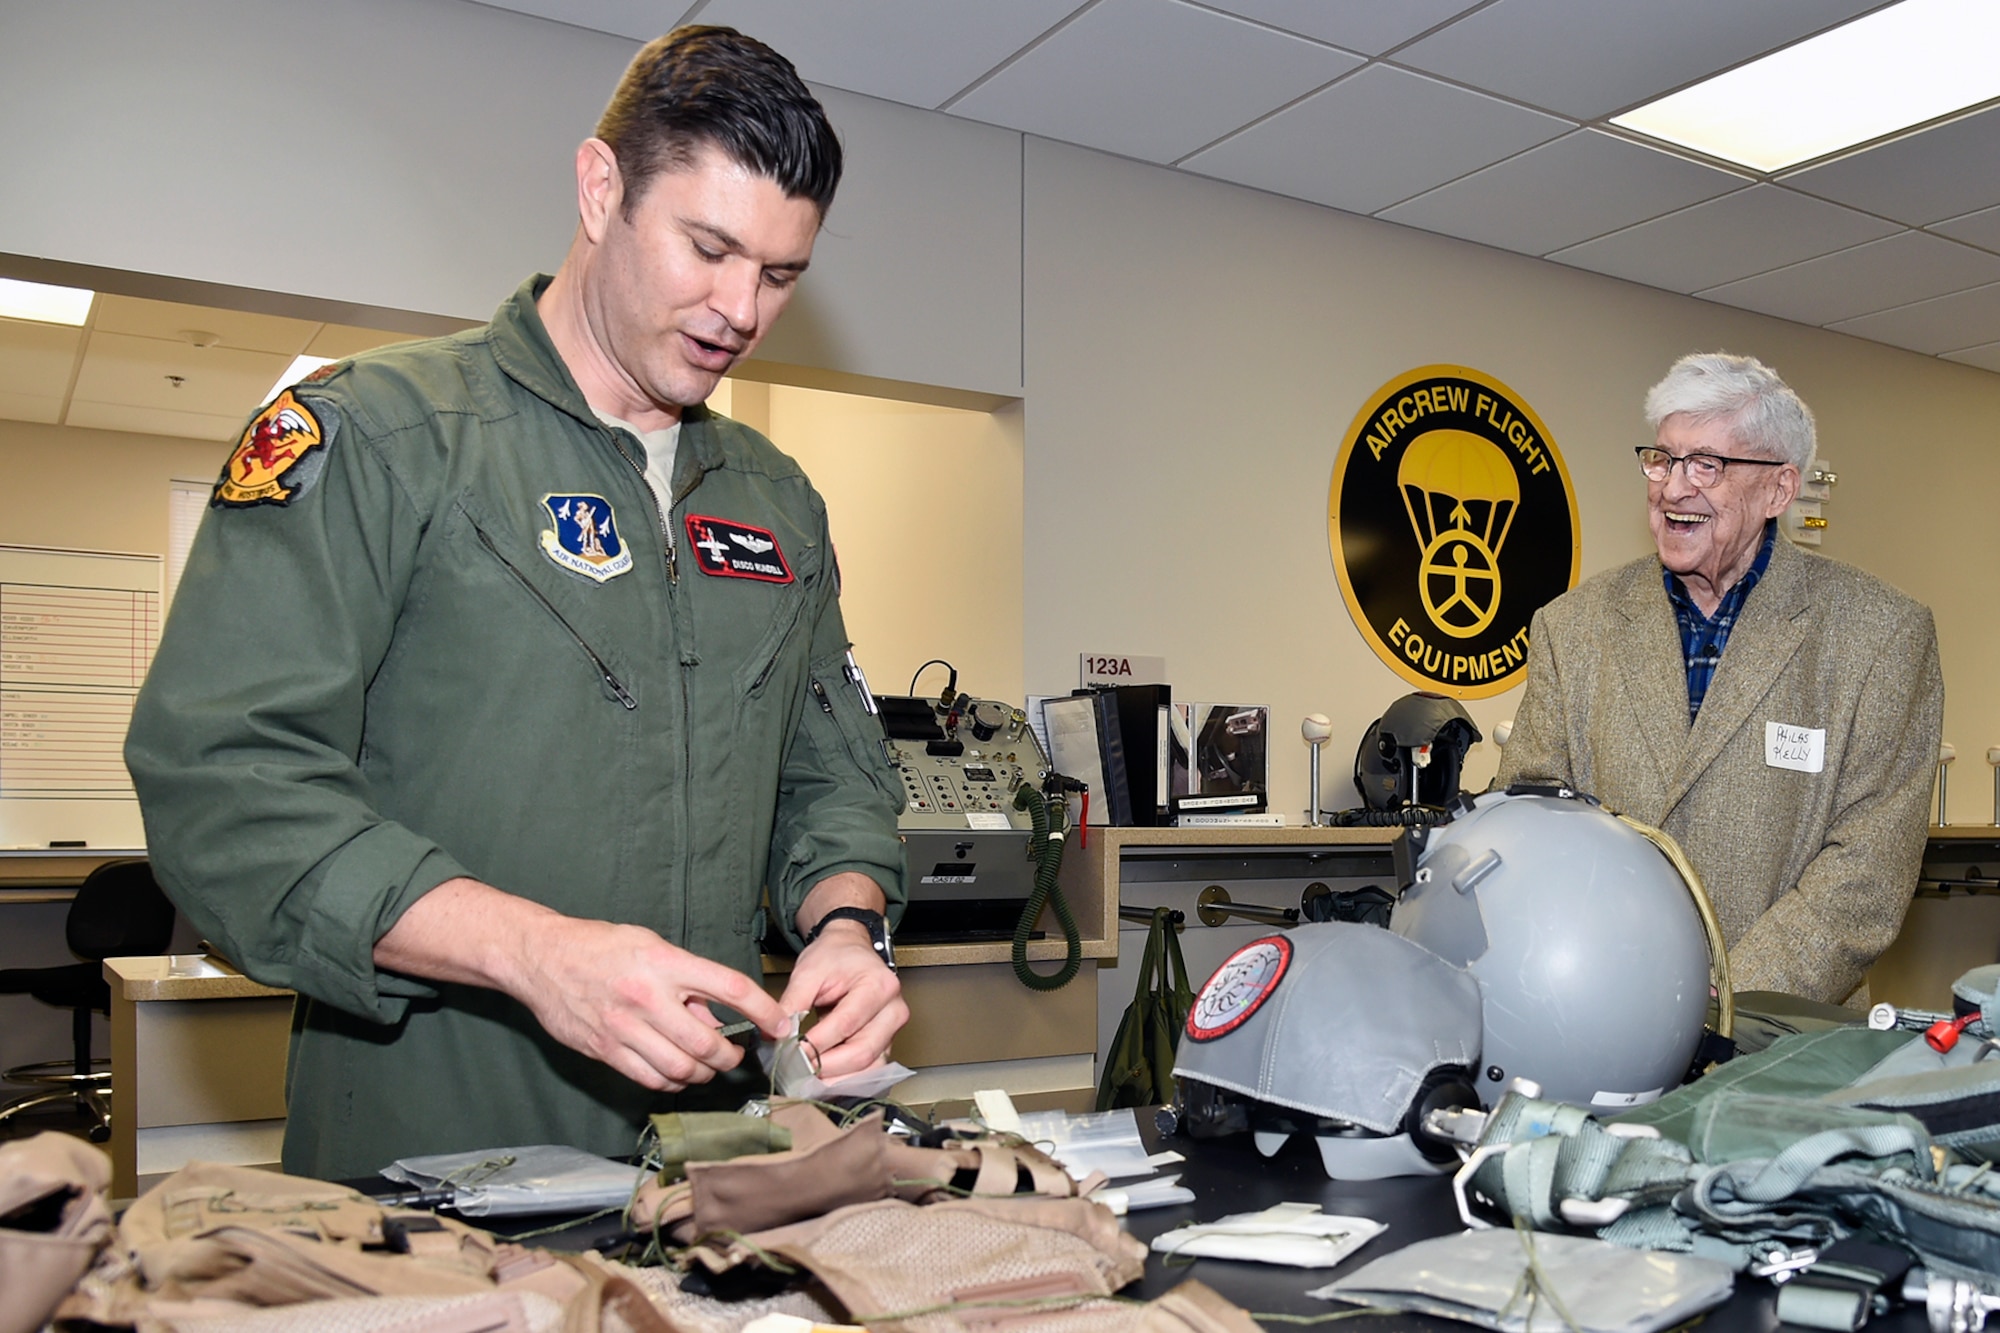 Major Bill Rundell, a pilot with the 107th Fighter Squadron, shows some of the life support equipment used by Air Force pilots to Philas Kelly, who served in the 107th prior to World War II, during a visit by Kelly to the squadron at Selfridge Air National Guard Base, March 15, 2016. (U.S. Air National Guard photo by Terry Atwell)